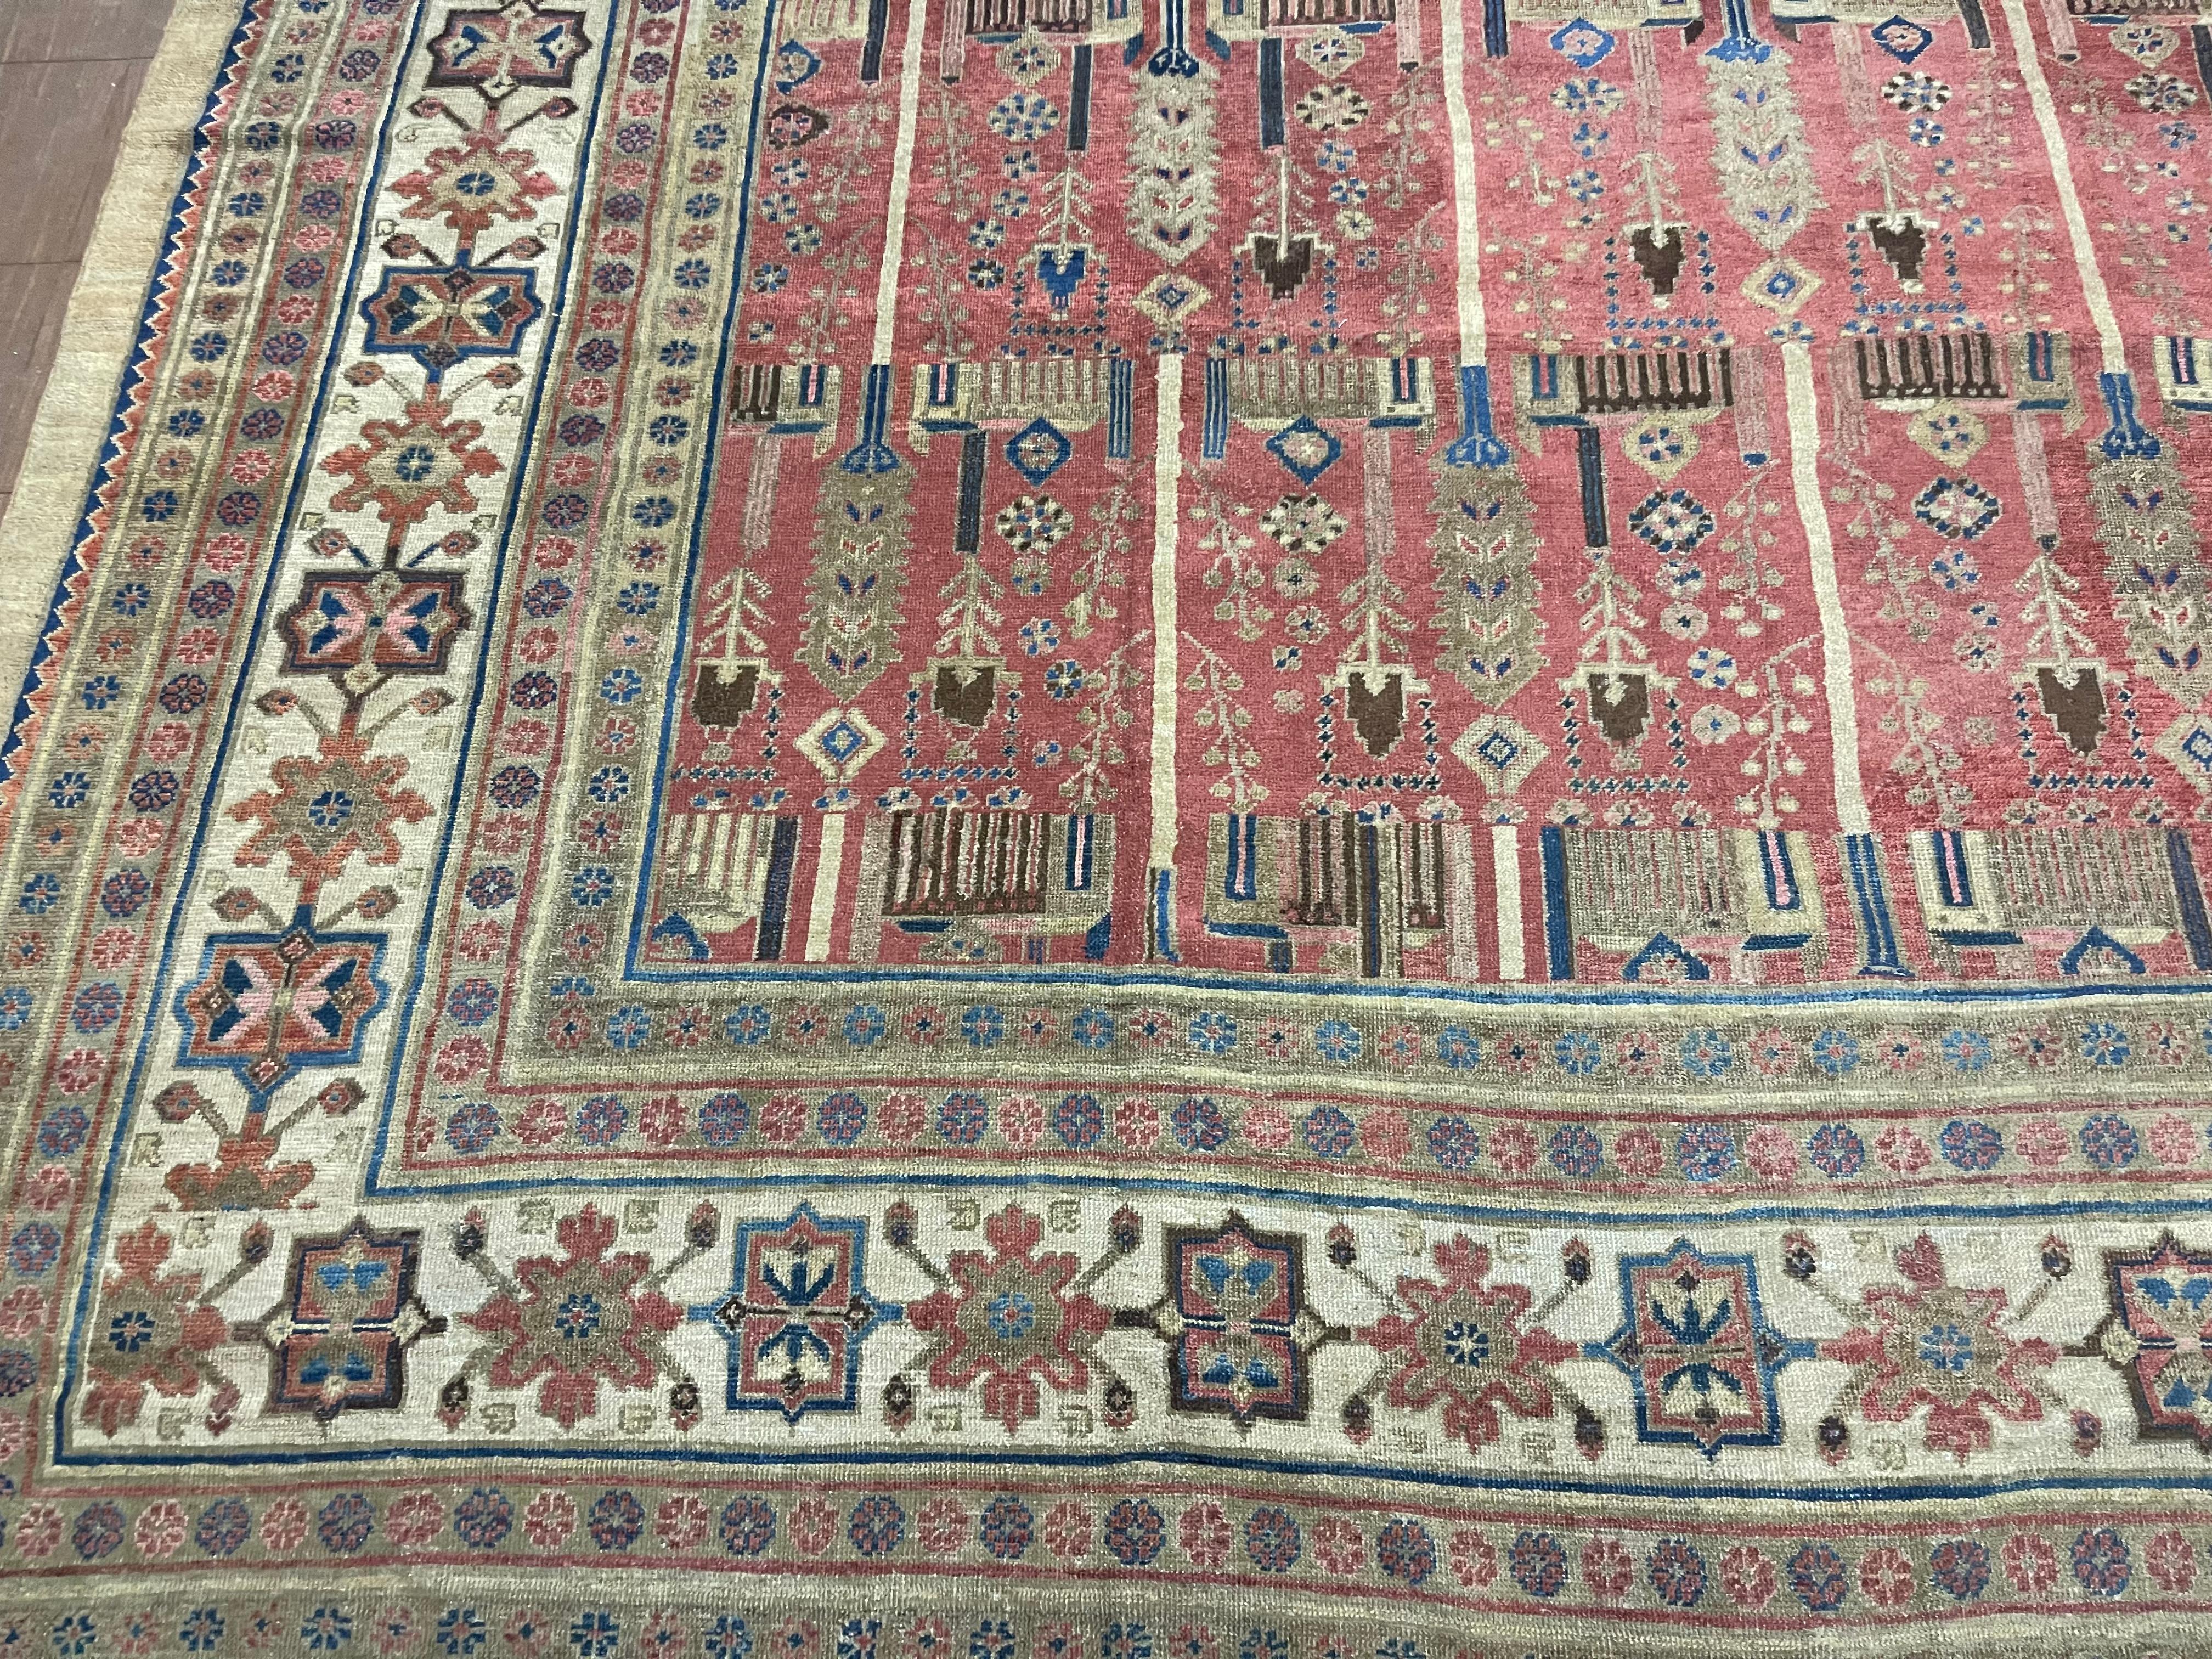 Handmade Antique Persian Bakhshaish Rug 12.2' x 15.8', 1880s - 1B21 In Good Condition For Sale In Bordeaux, FR